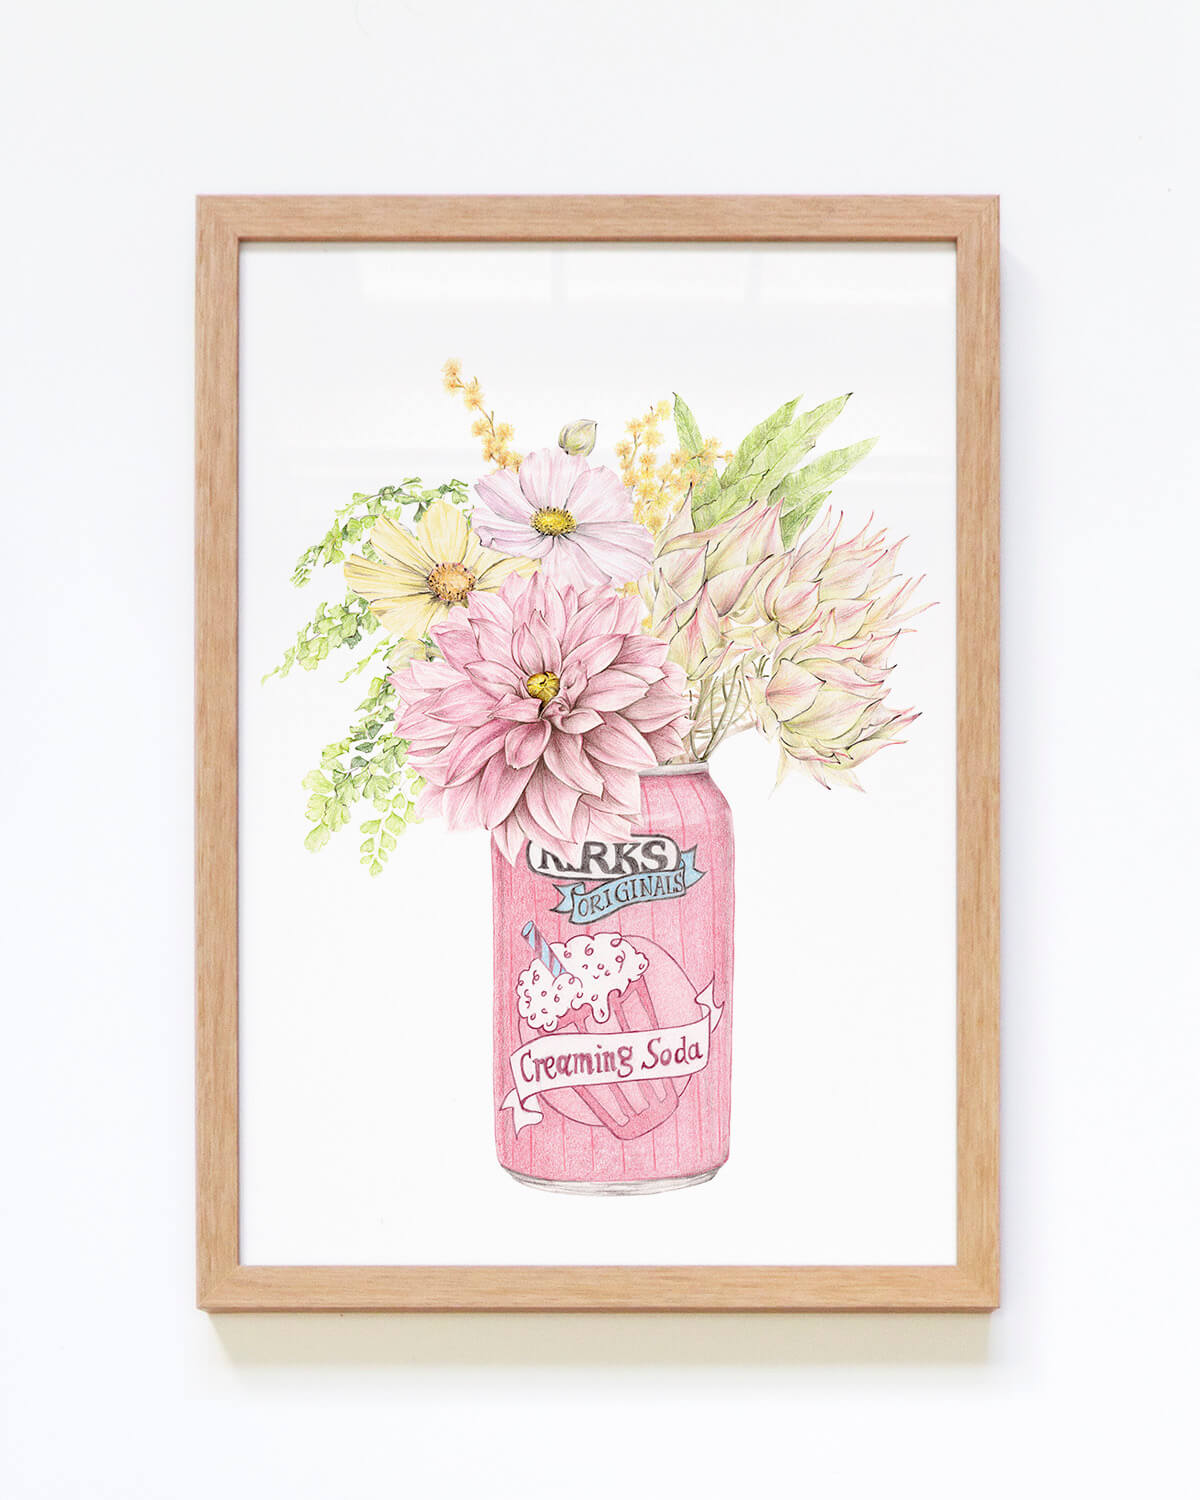 Kirks Creaming Soda with bunch of flowers framed art print